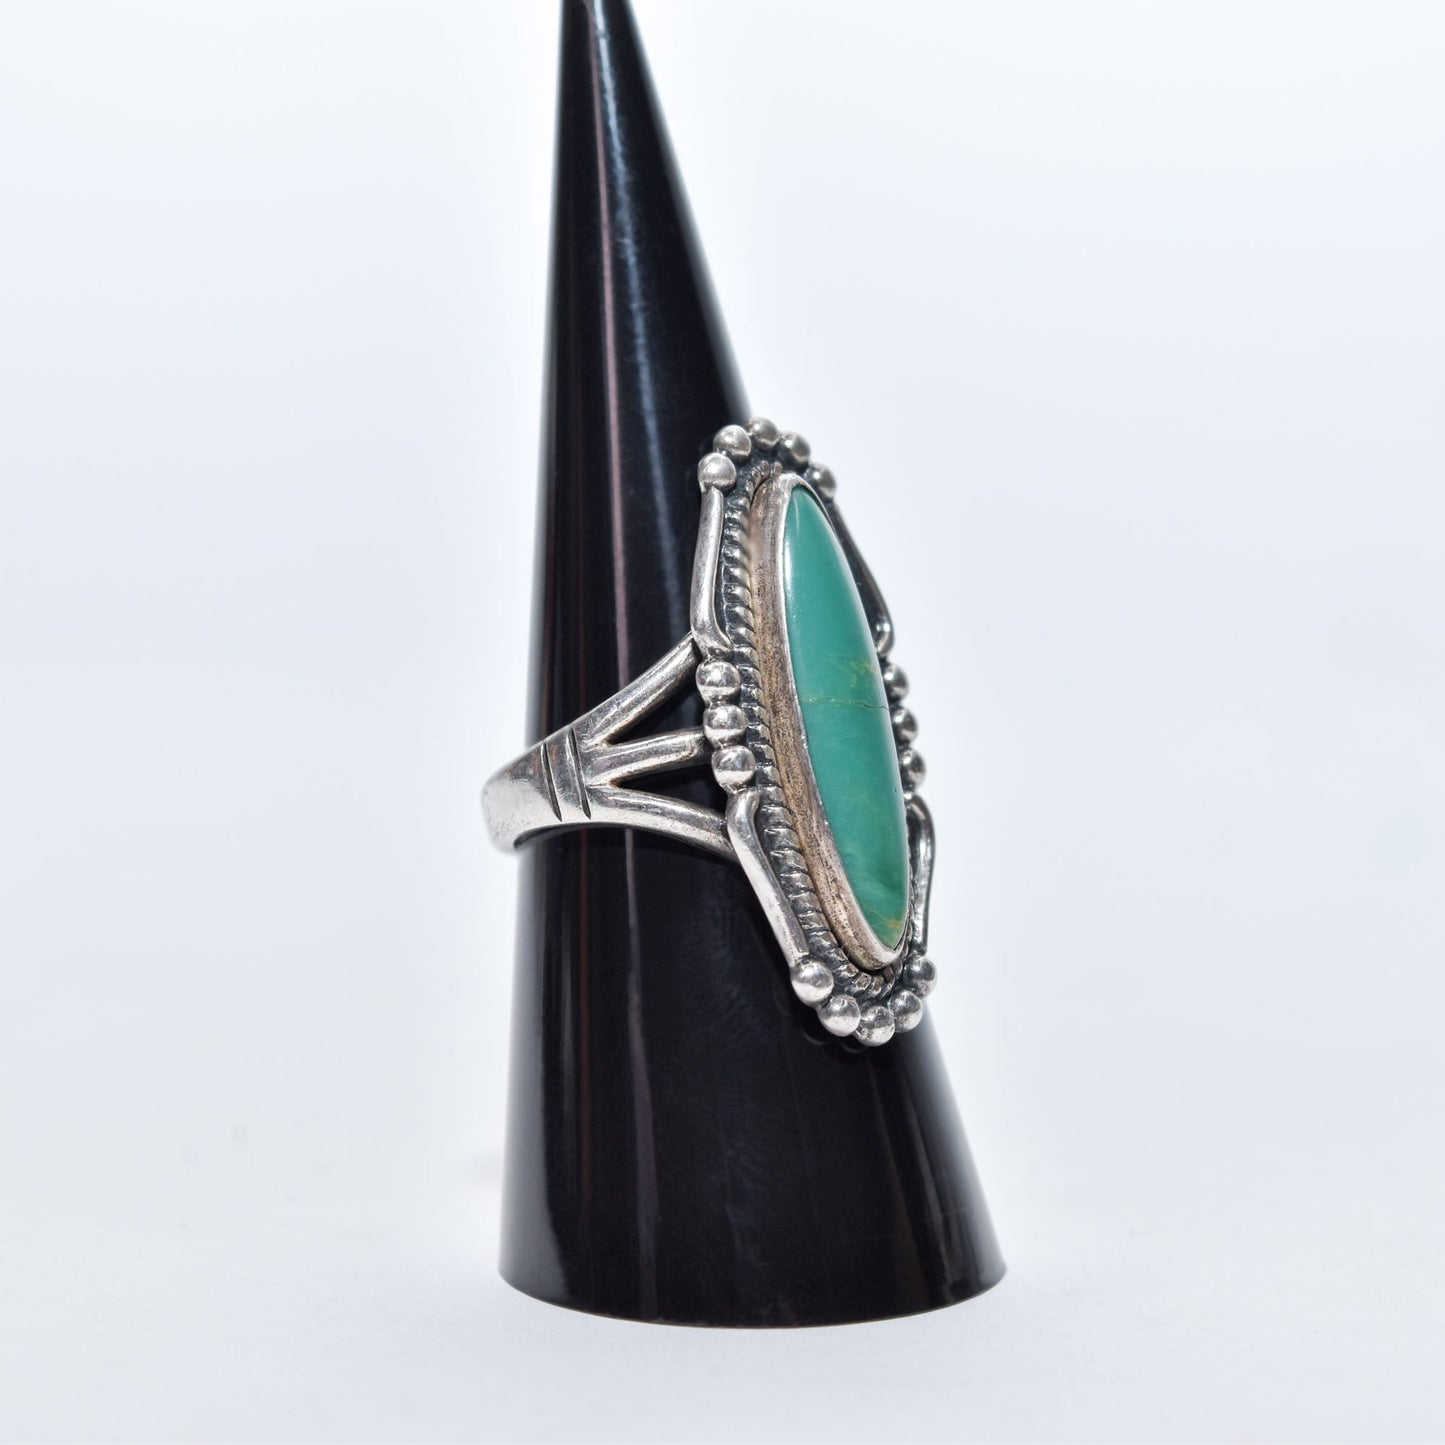 Native American sterling silver turquoise marquise ring on a display, Southwestern jewelry, size 8 US, on a white background.